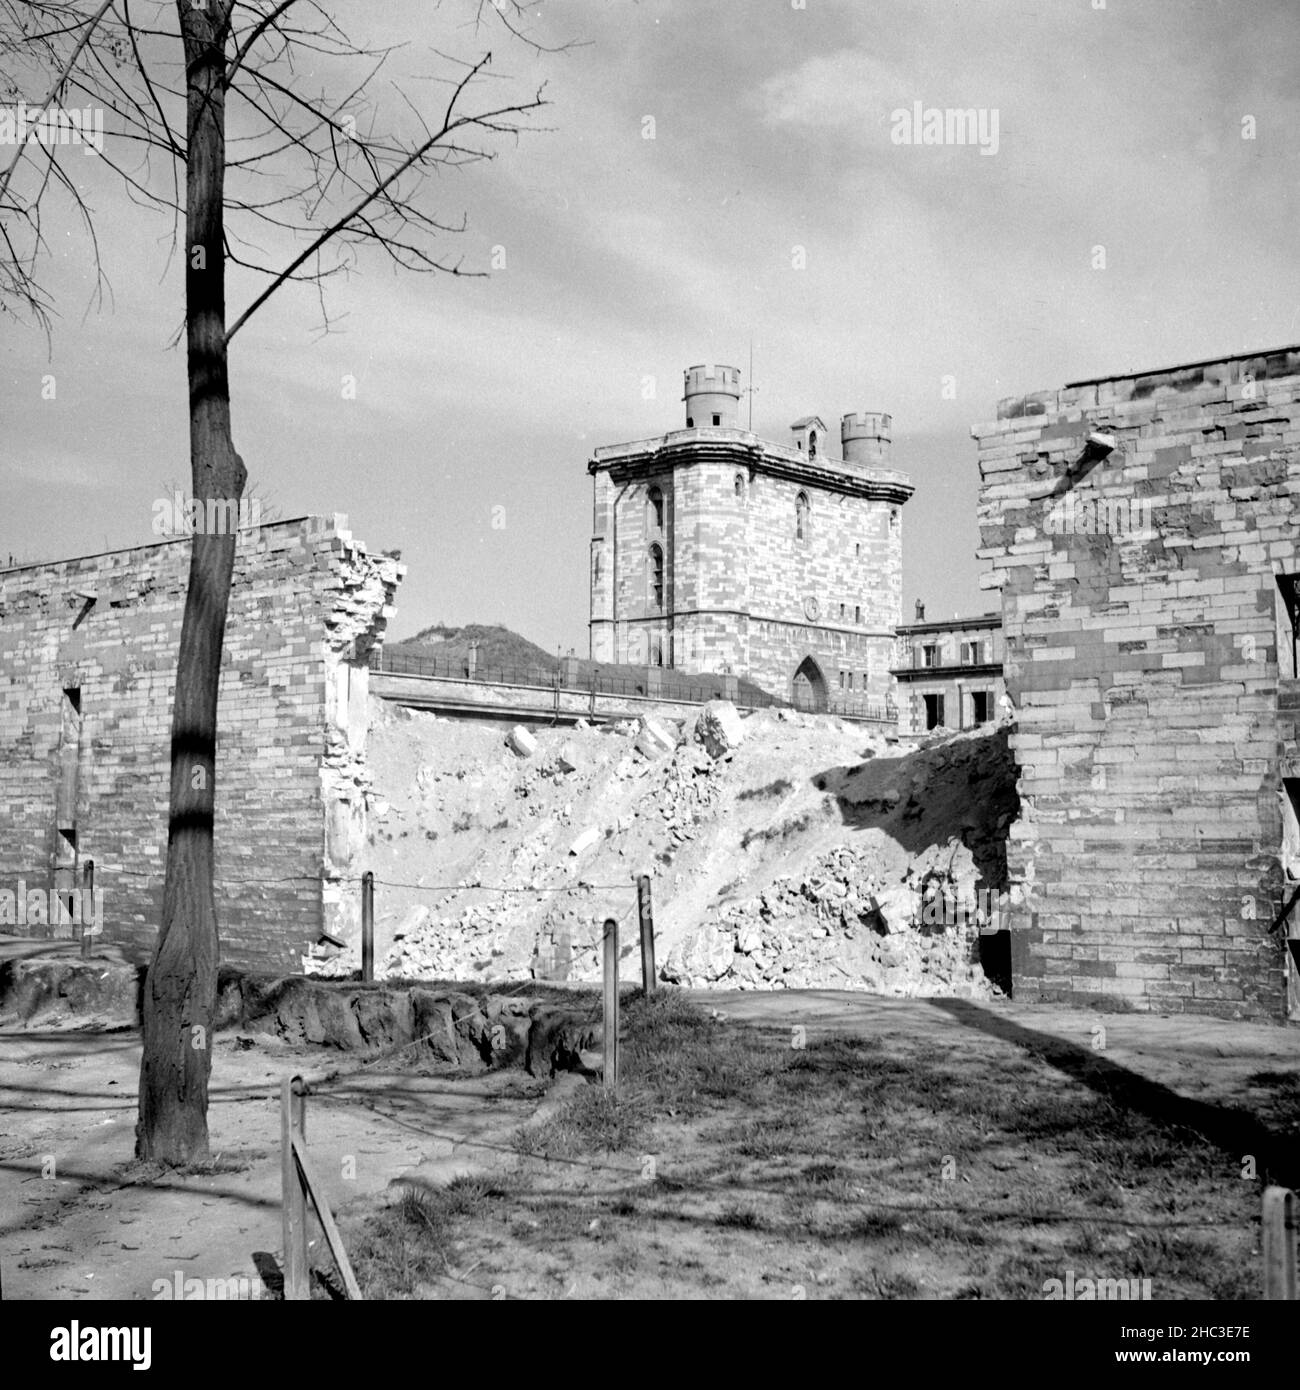 Paris Château de Vincennes, depicting damage to wall during German occupation. An early 1945 photograph taken from outside the west wall of the fortress shows the aftermath of an explosion caused by occupation German forces when they blew up their own munitions dump prior to the arrival of Allied liberation forces in August 1944.  Photographer Clarence Inman would be standing with the Keep or Donjon to this right. This view looks northwest towards the interior side of the Tour du Village. Stock Photo